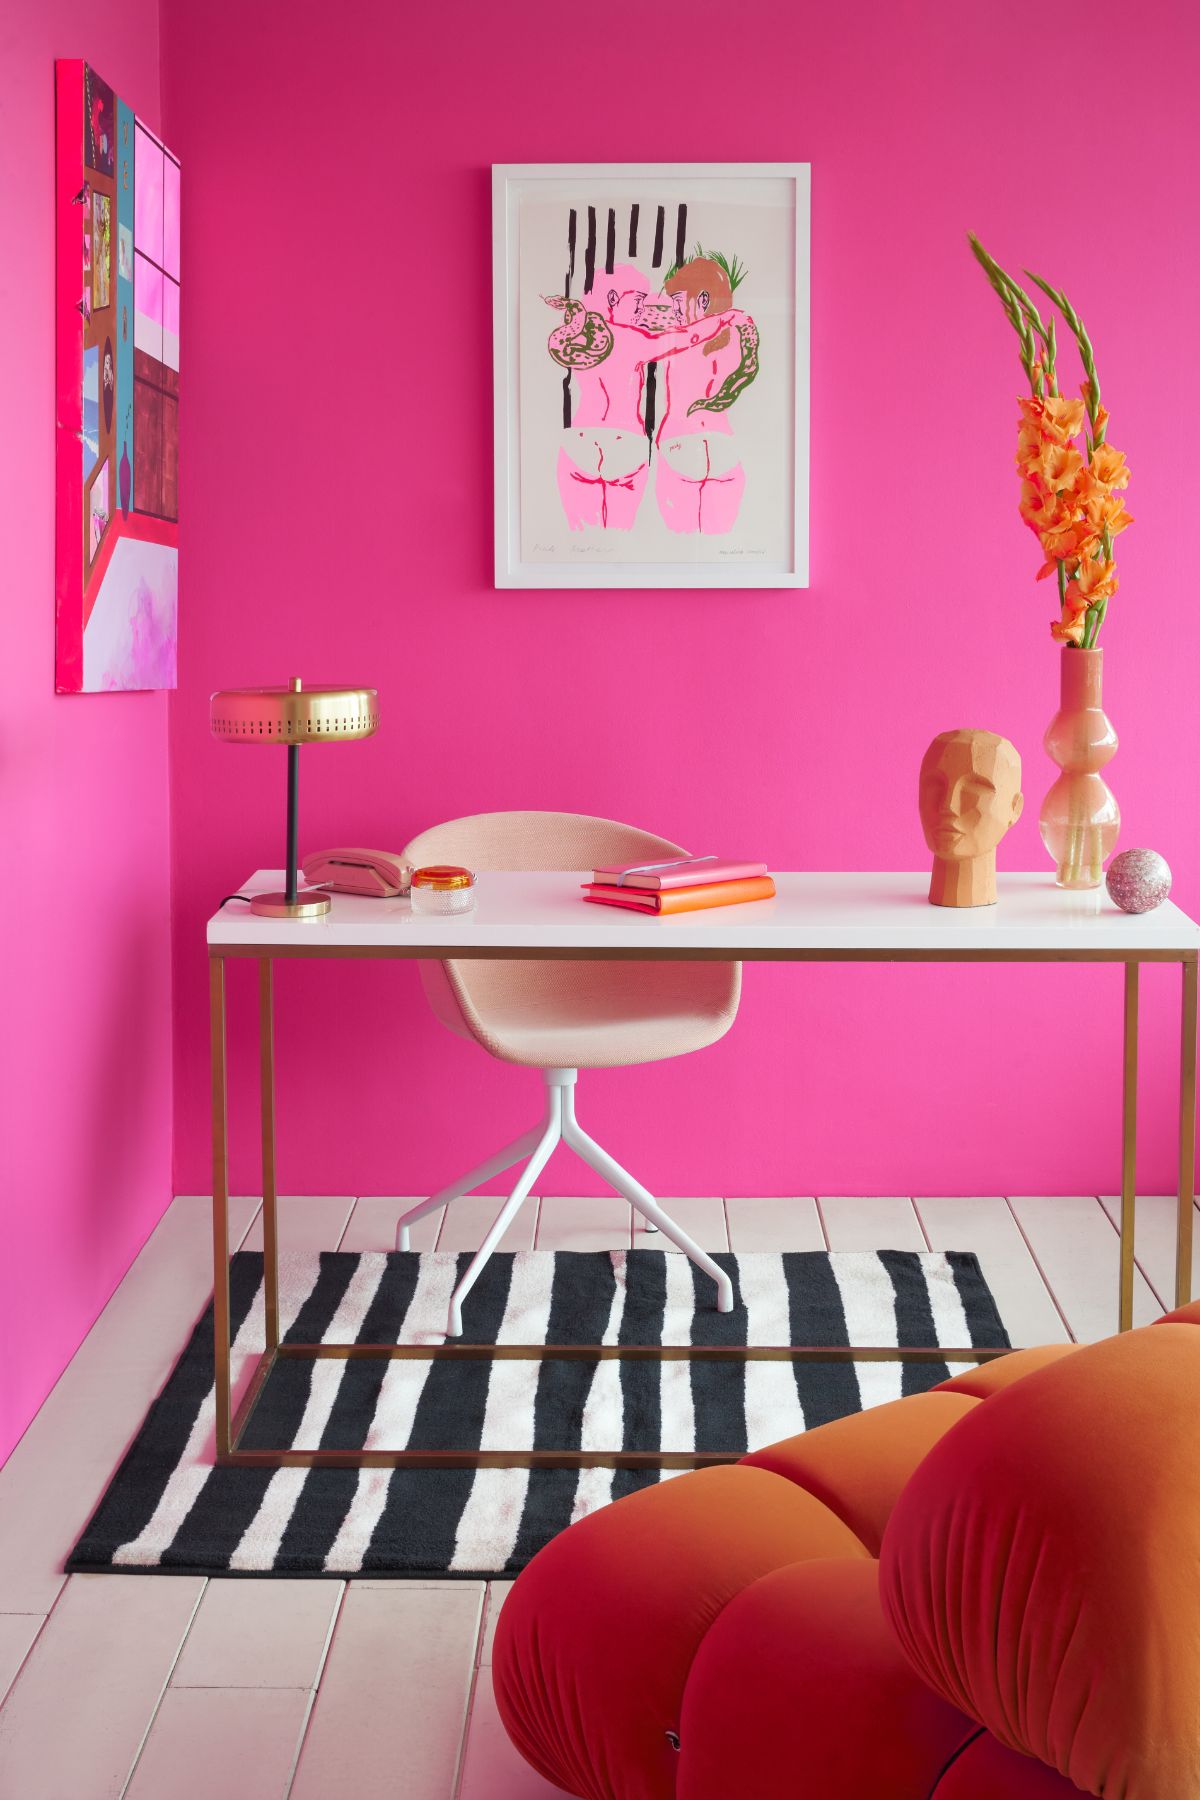 Dark Pink office walls painted with FTT-006

